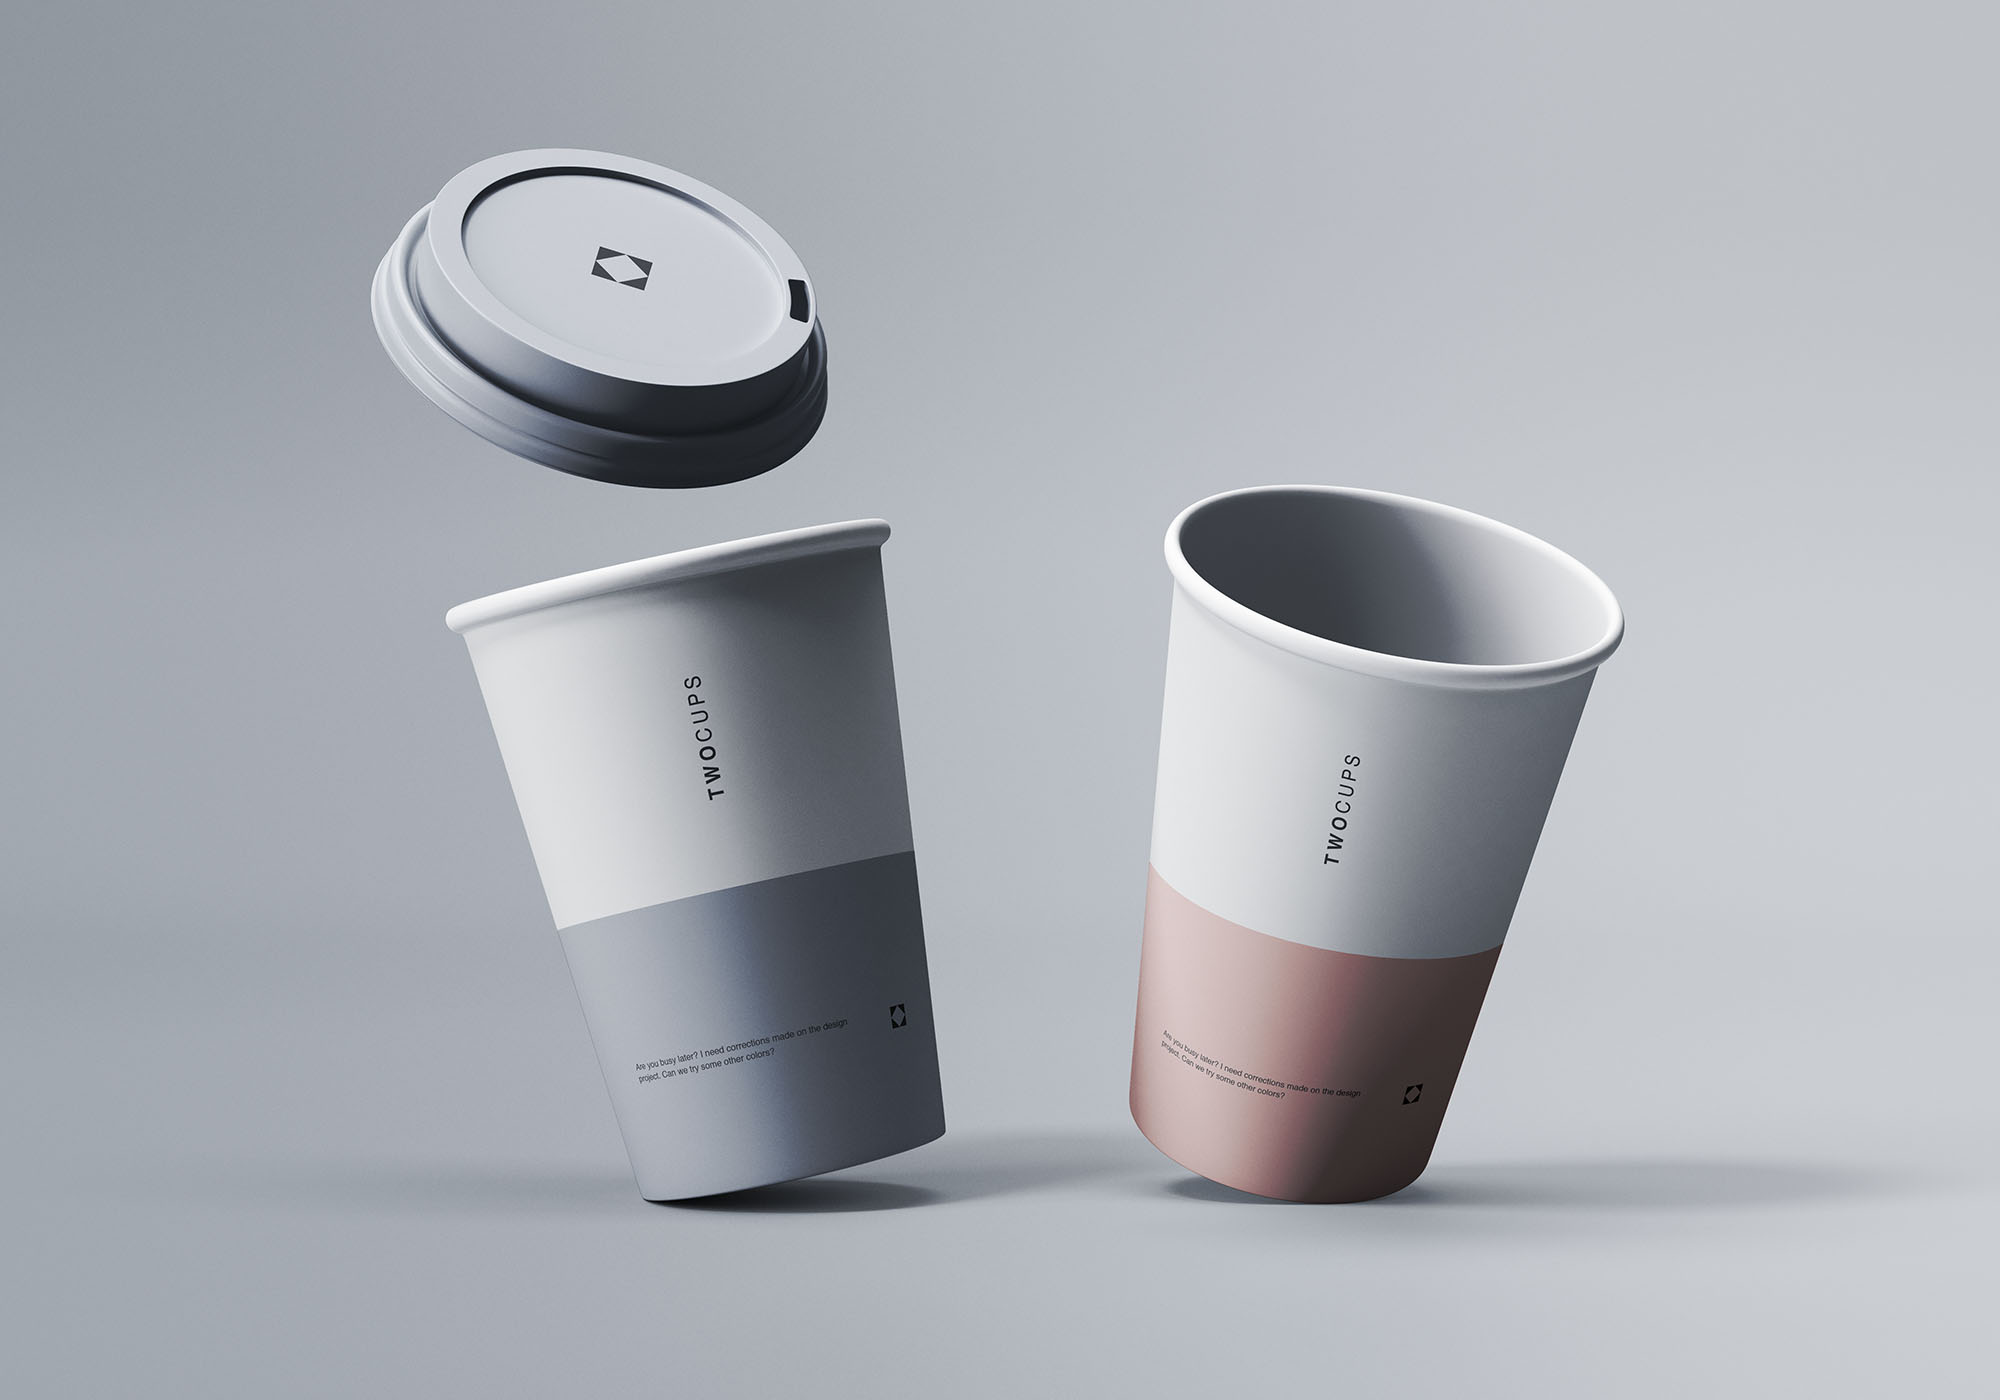 https://resourceboy.com/wp-content/uploads/2021/08/two-floating-disposable-coffee-cups-mockup-2.jpg